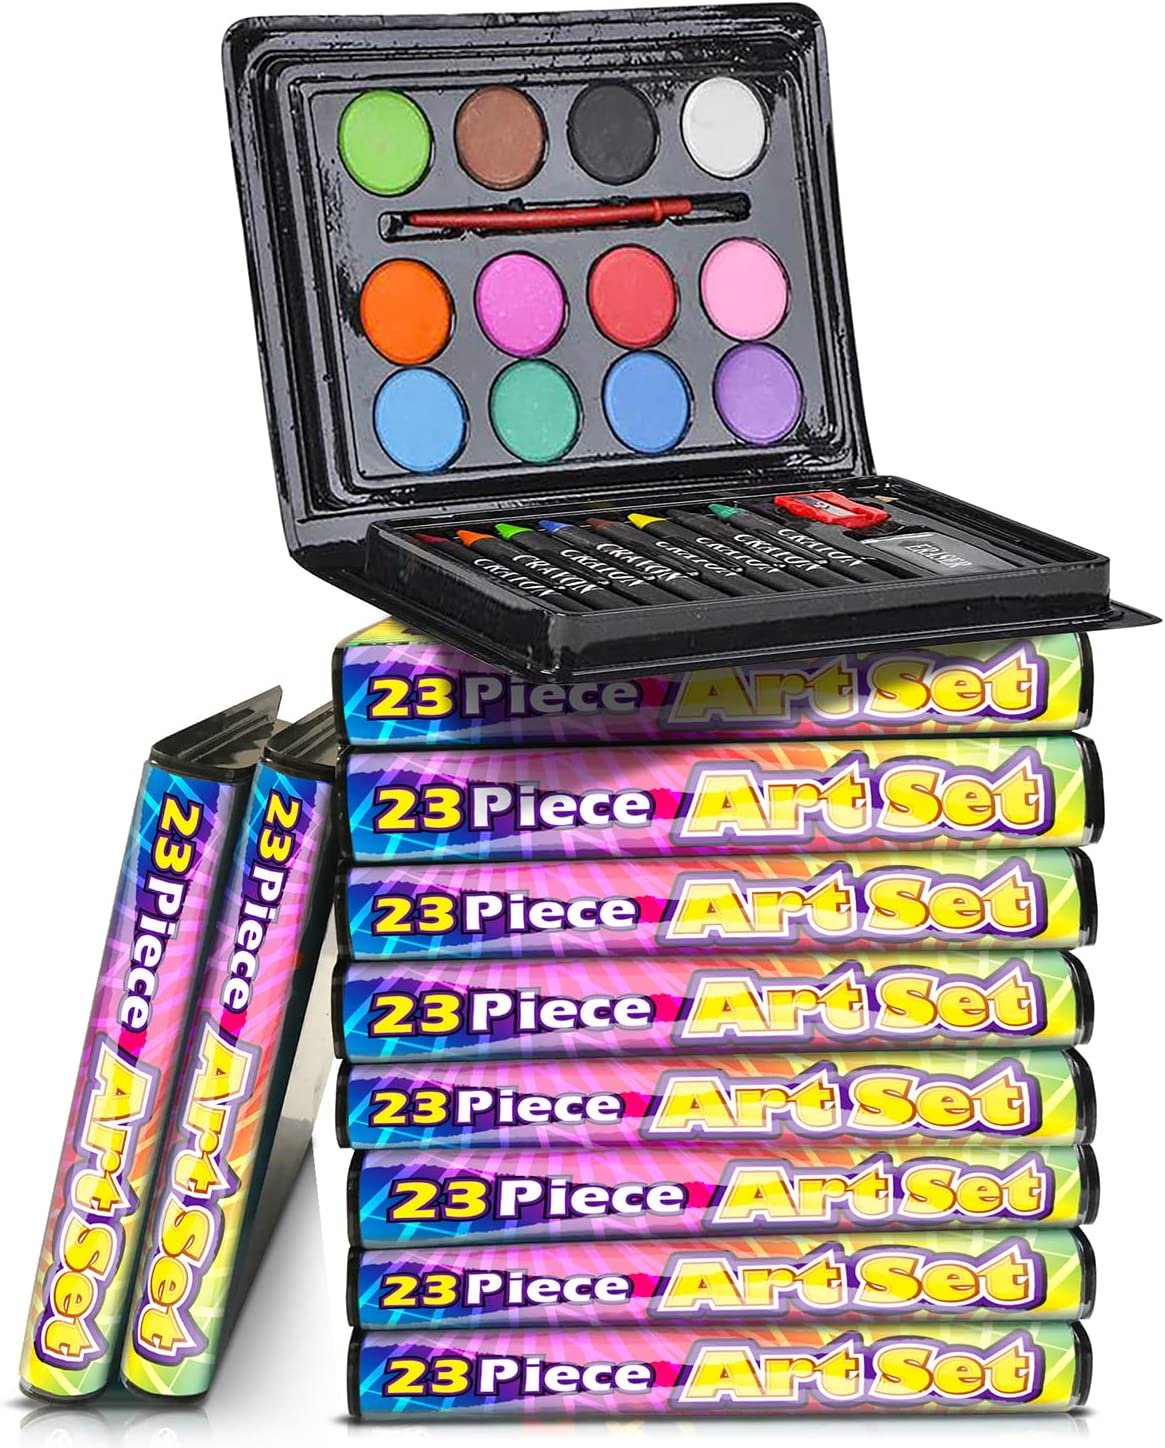 Mini Art Sets for Kids - Pack of 12-23-Piece Kits with Watercolors